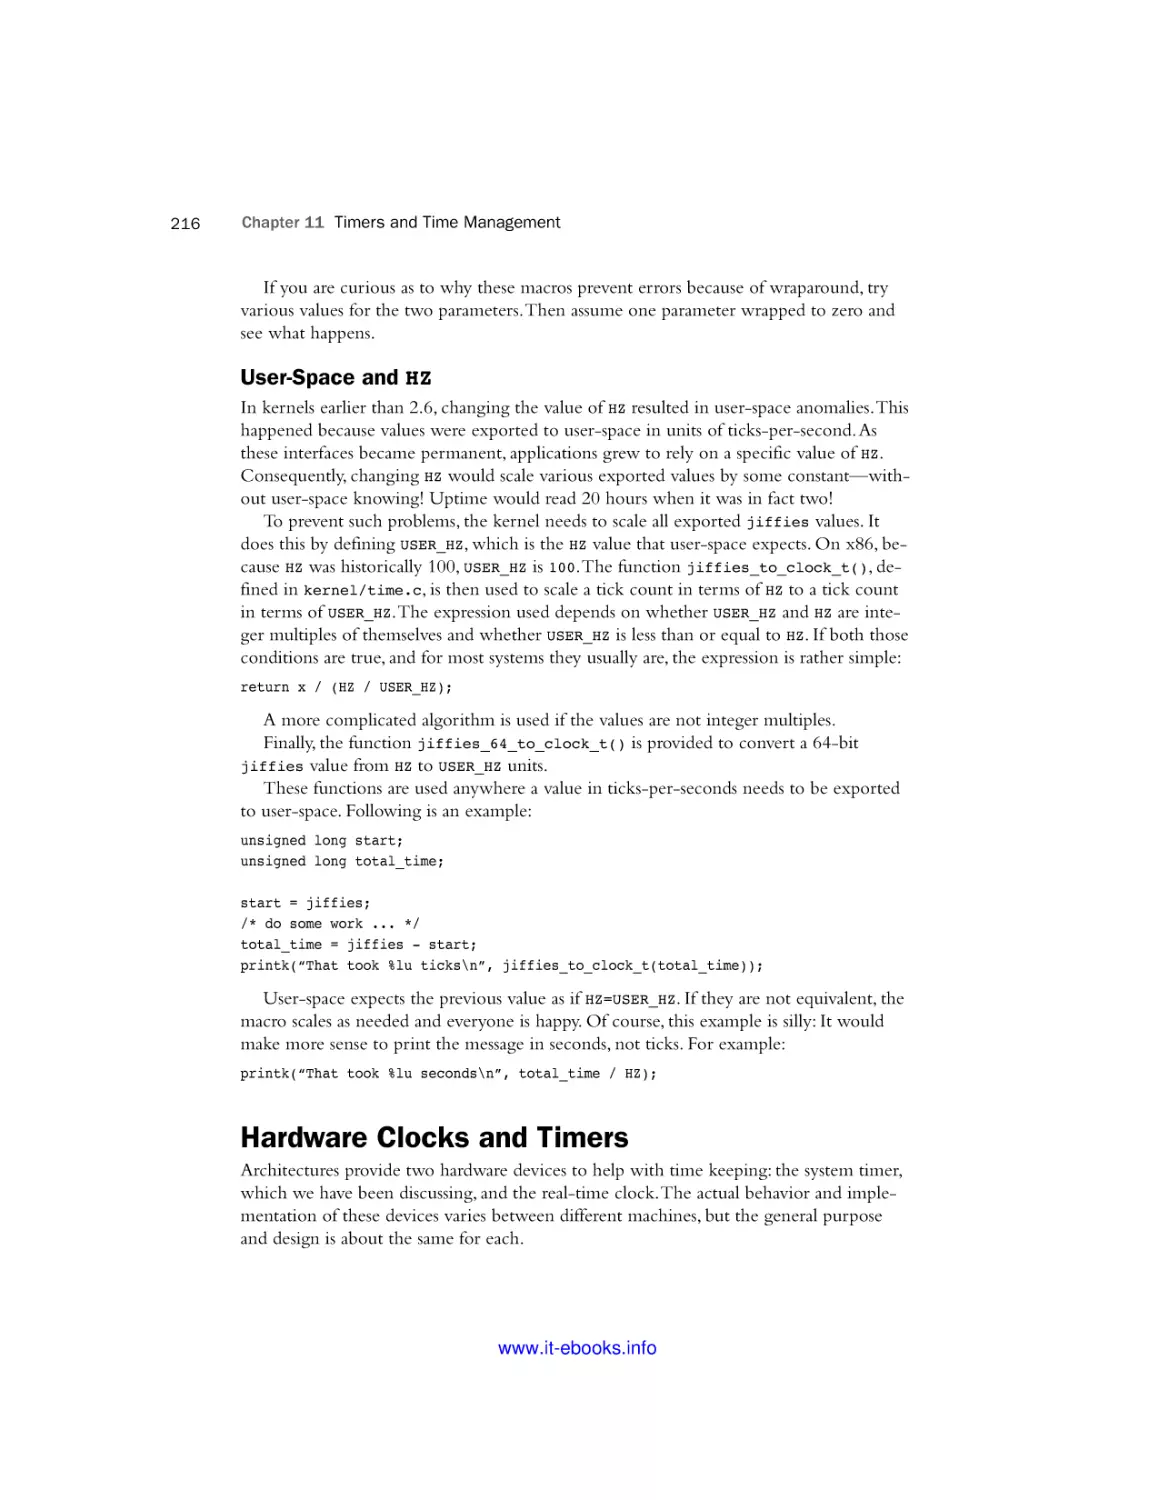 User-Space and HZ
Hardware Clocks and Timers